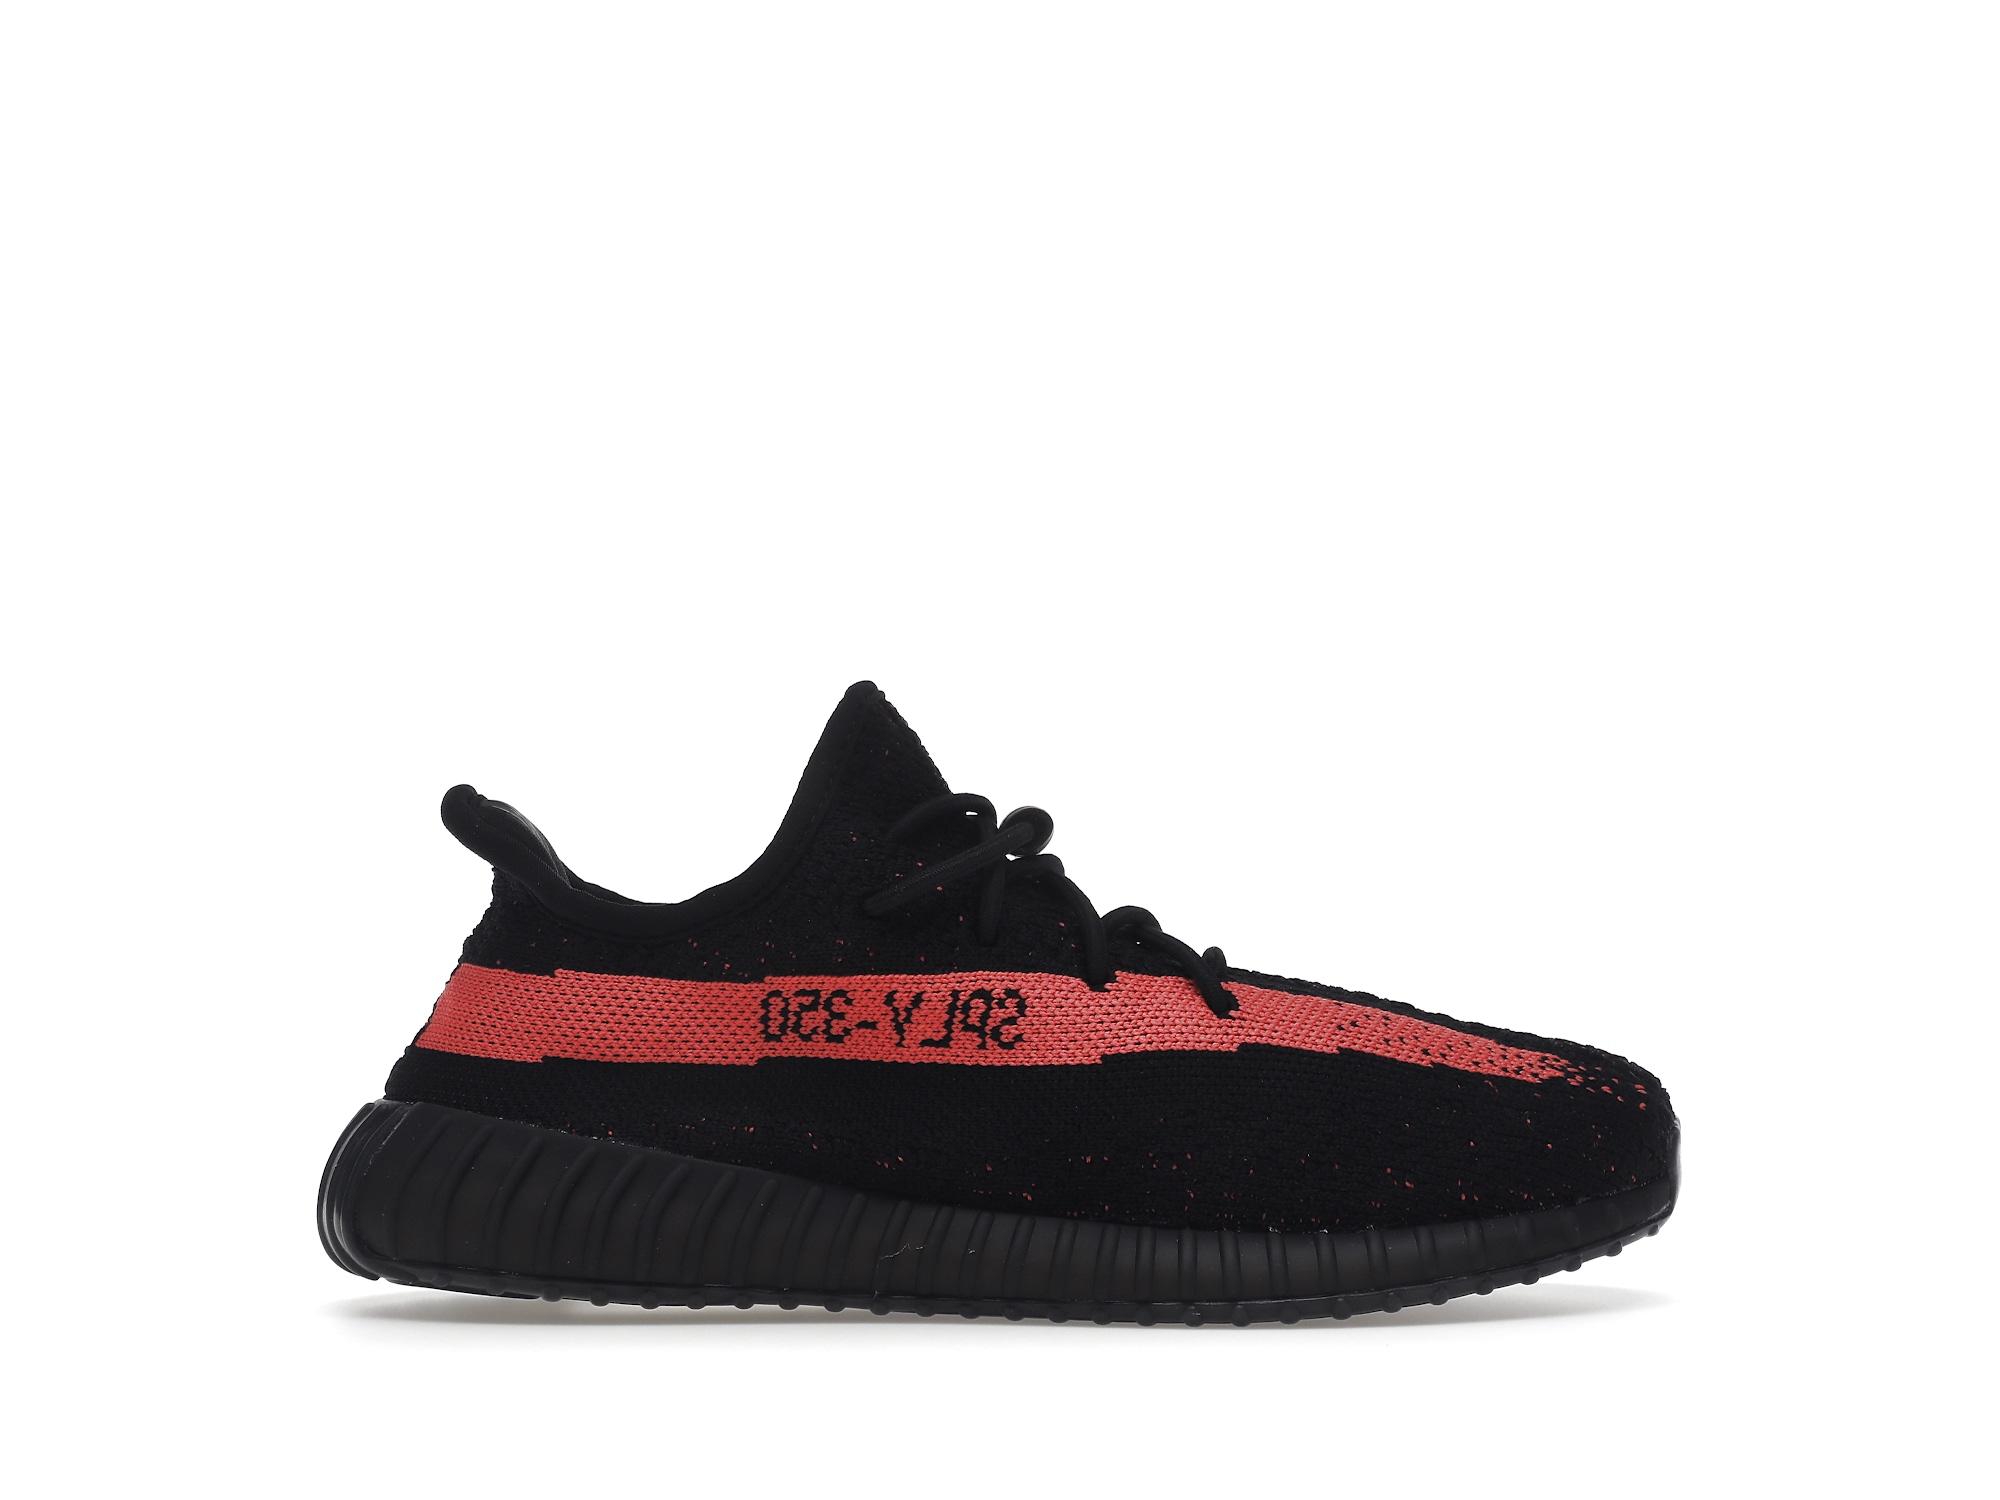 adidas Yeezy Boost 350 V2 Core Black Red (Kids) キッズ ...